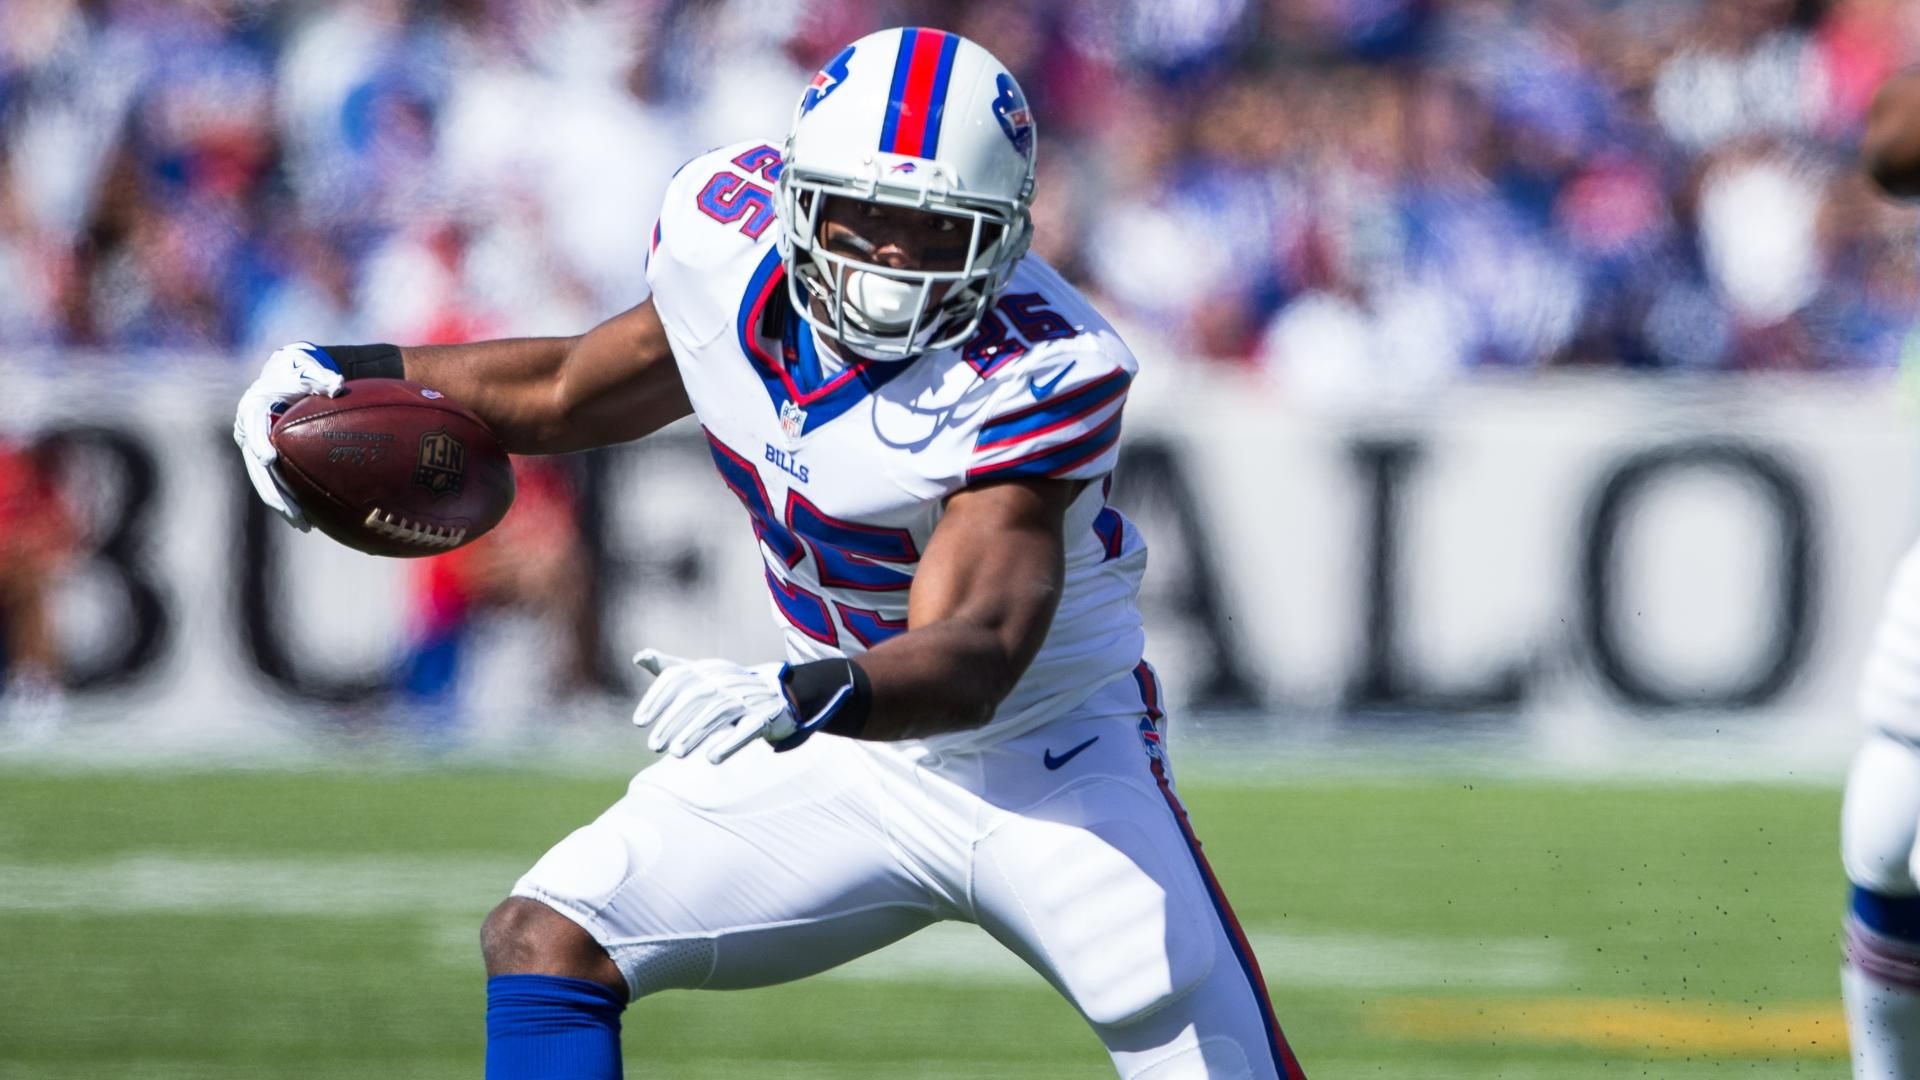 McCoy returns to the Bills following a season of exciting production and hamstring rehabilitation. A few drunk cops could have killed him in a bar fight in